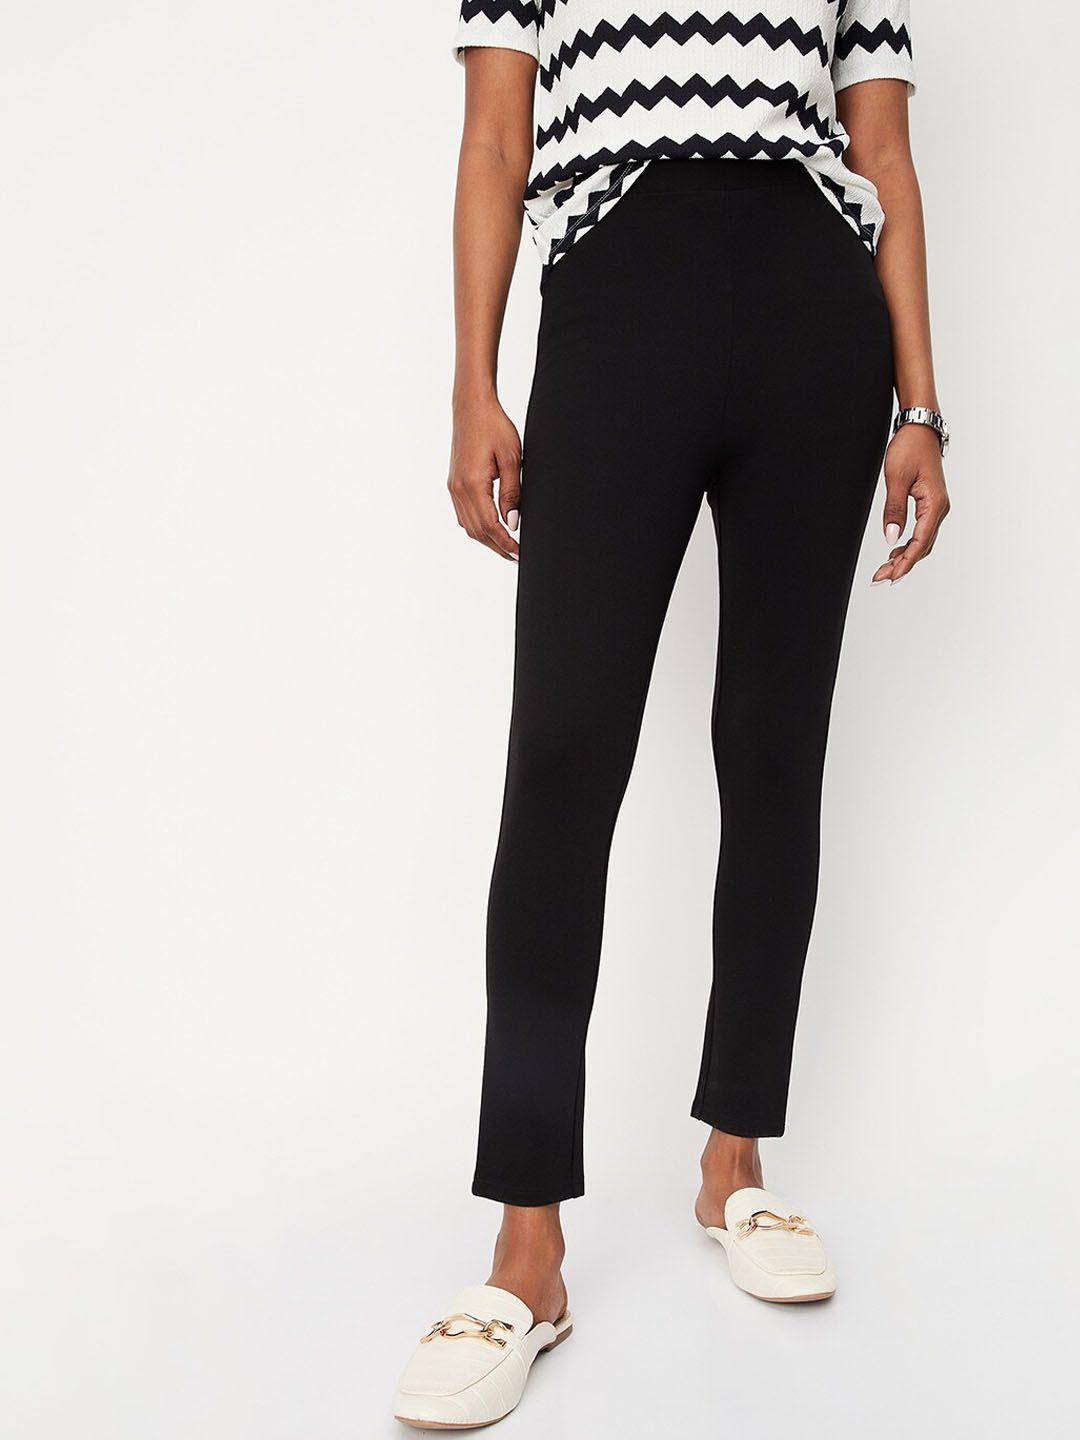 max-women-regular-fit-mid-rise-trousers